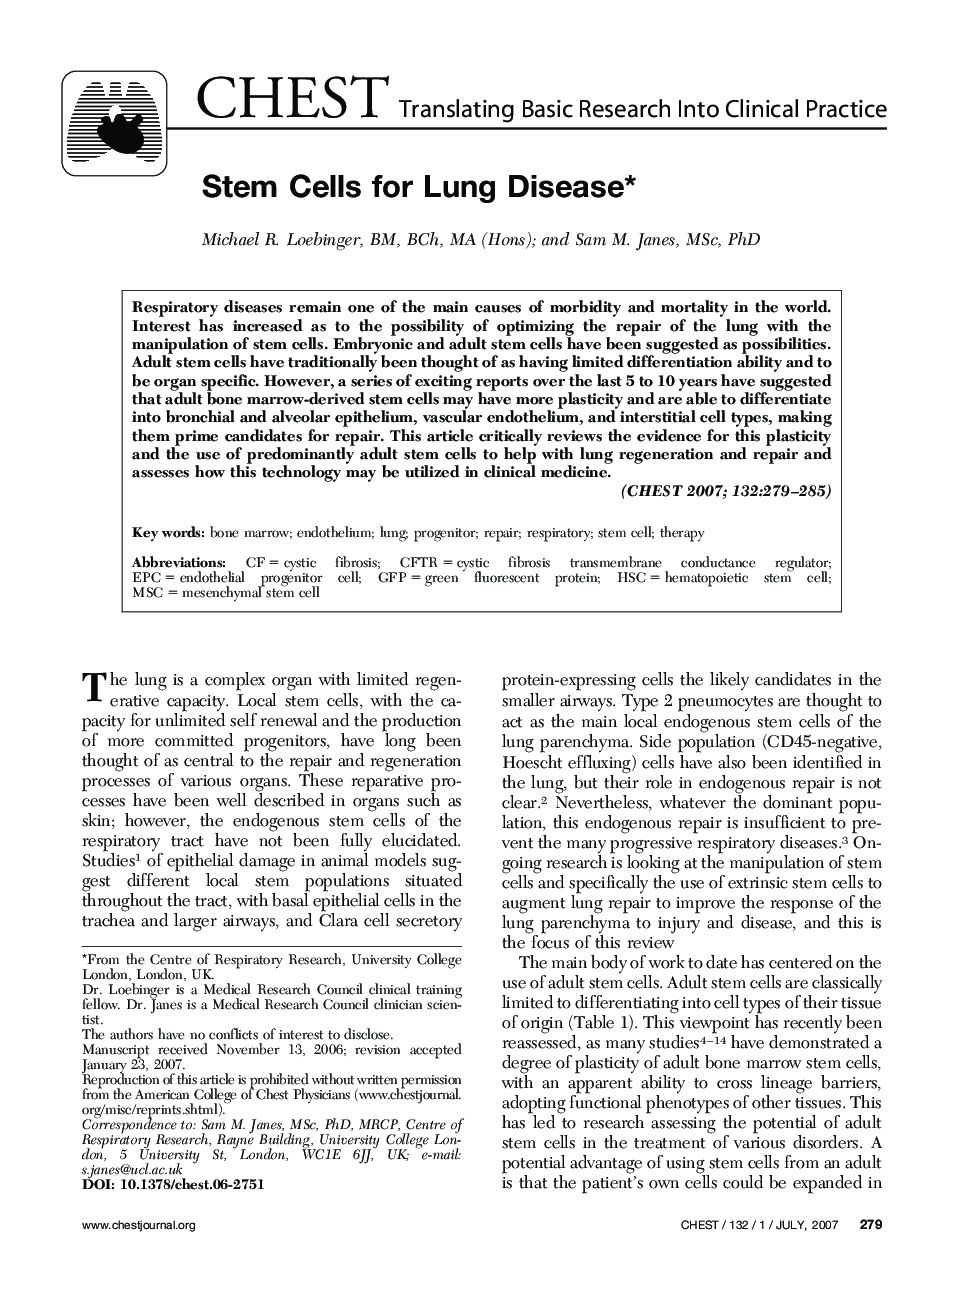 Stem Cells for Lung Disease